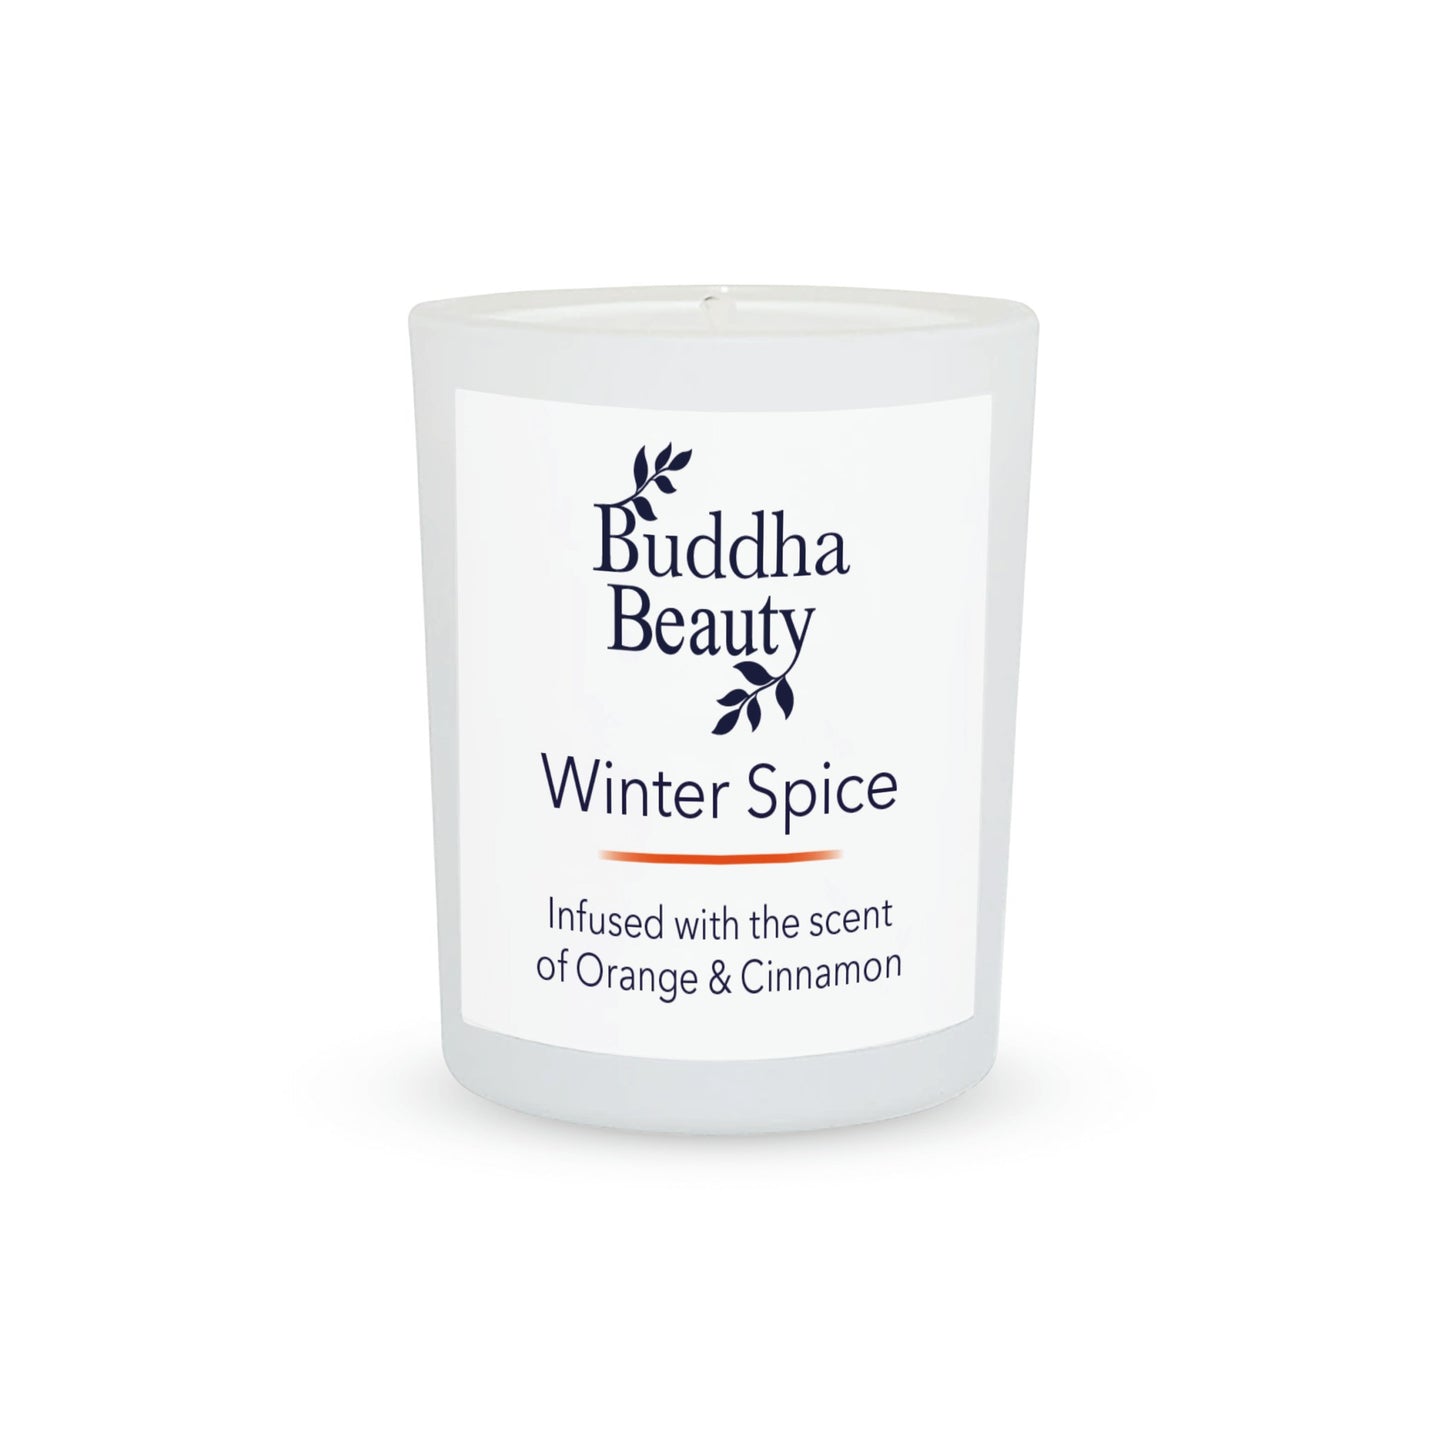 Winter Spice Room Collection - Buddha Beauty Skincare Room Candle #vegan# #cruelty-free# #skincare#